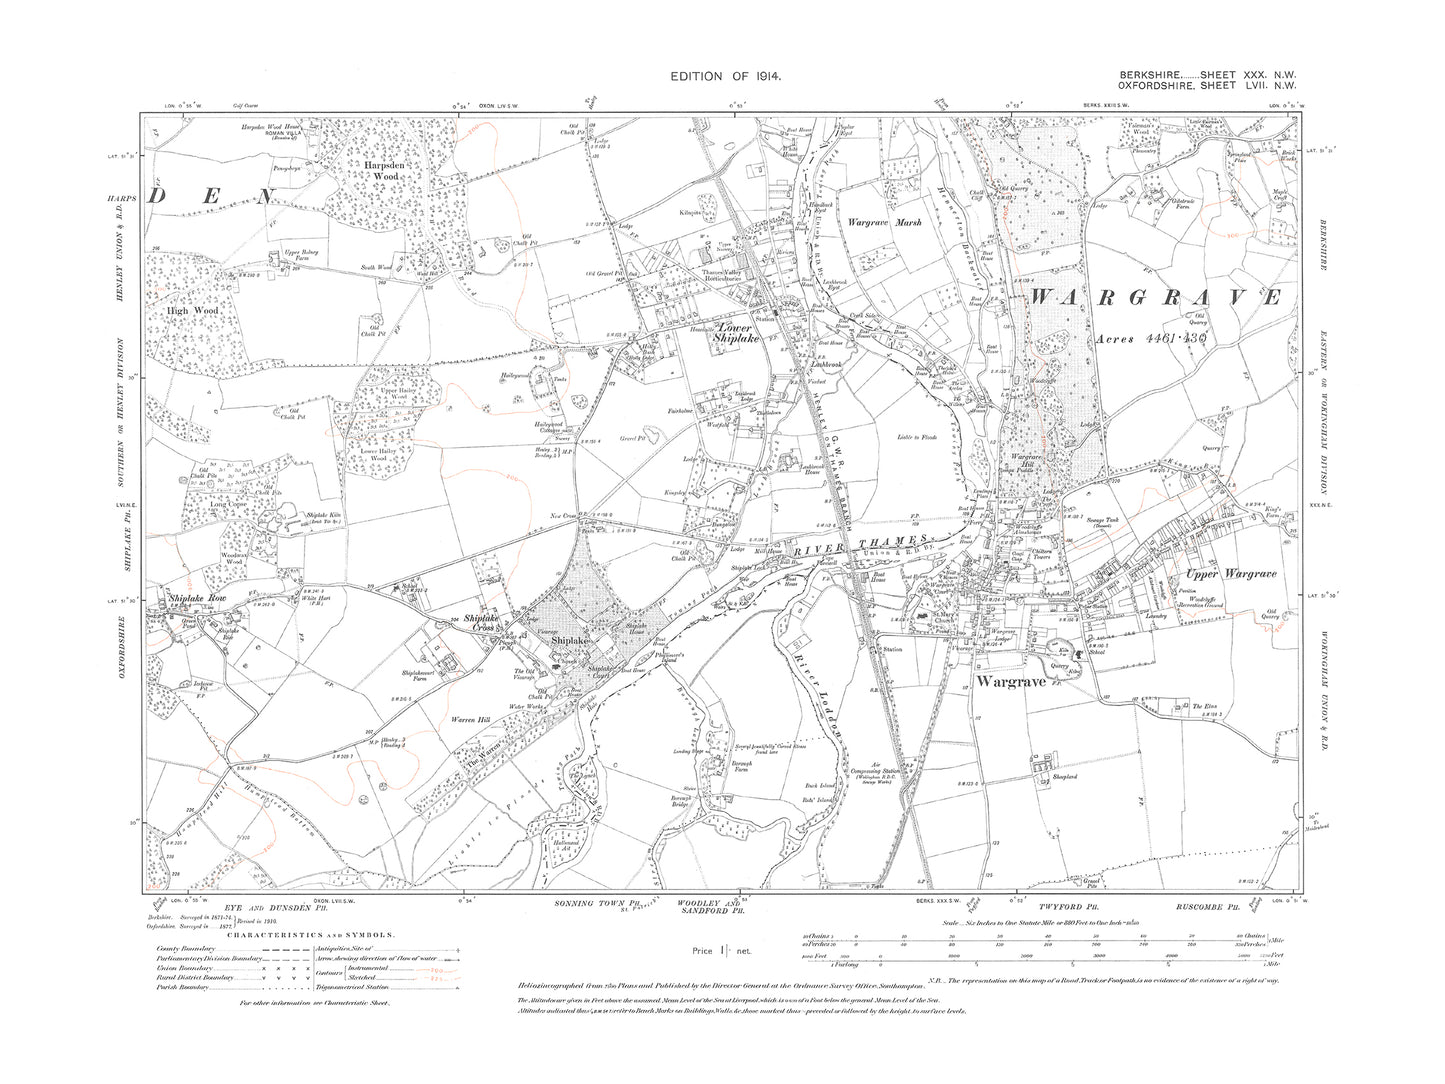 A 1914 map showing Wargrave in Berkshire - OS 1:10560 scale map, Berks 30NW